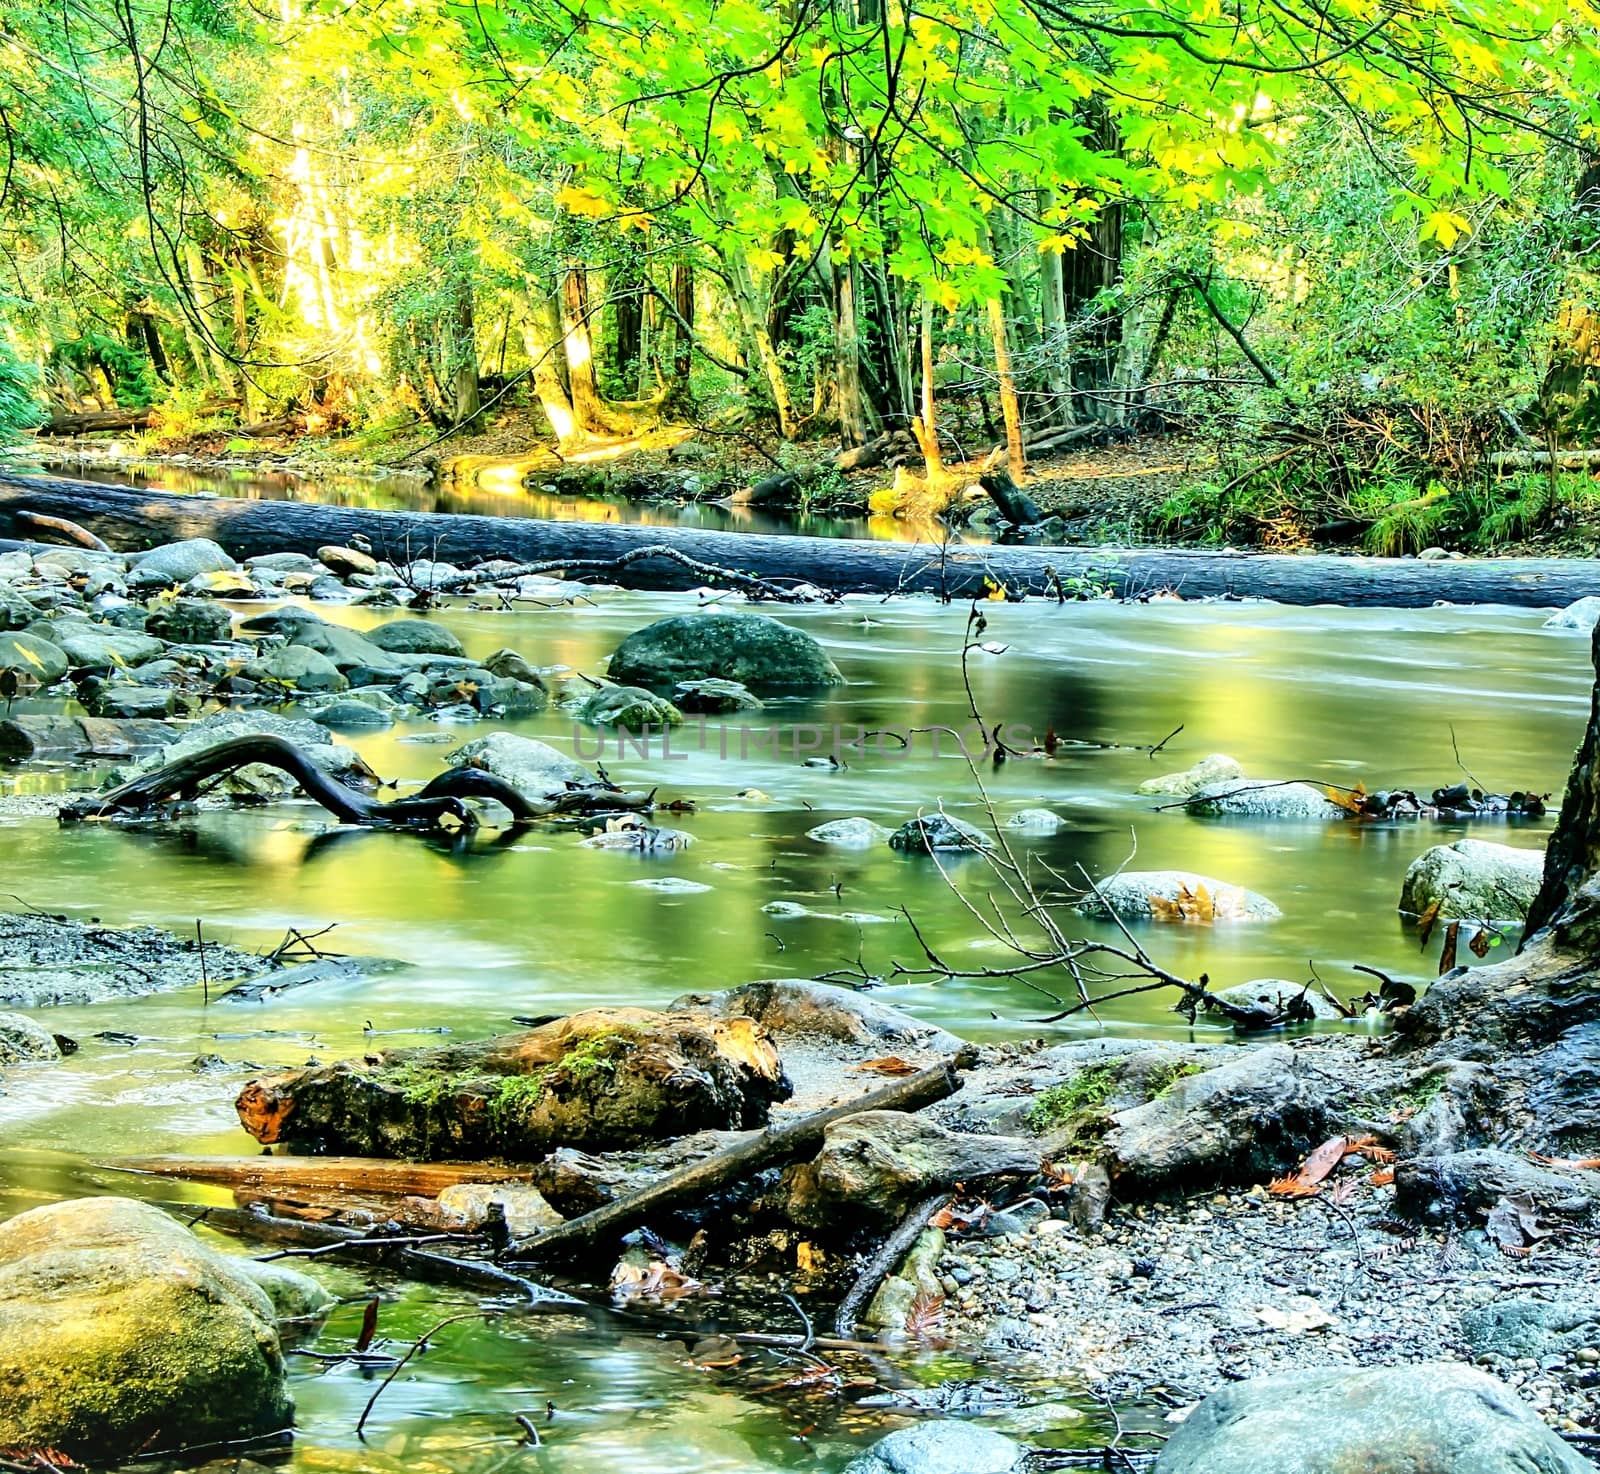 river in the forest with green trees and rocks